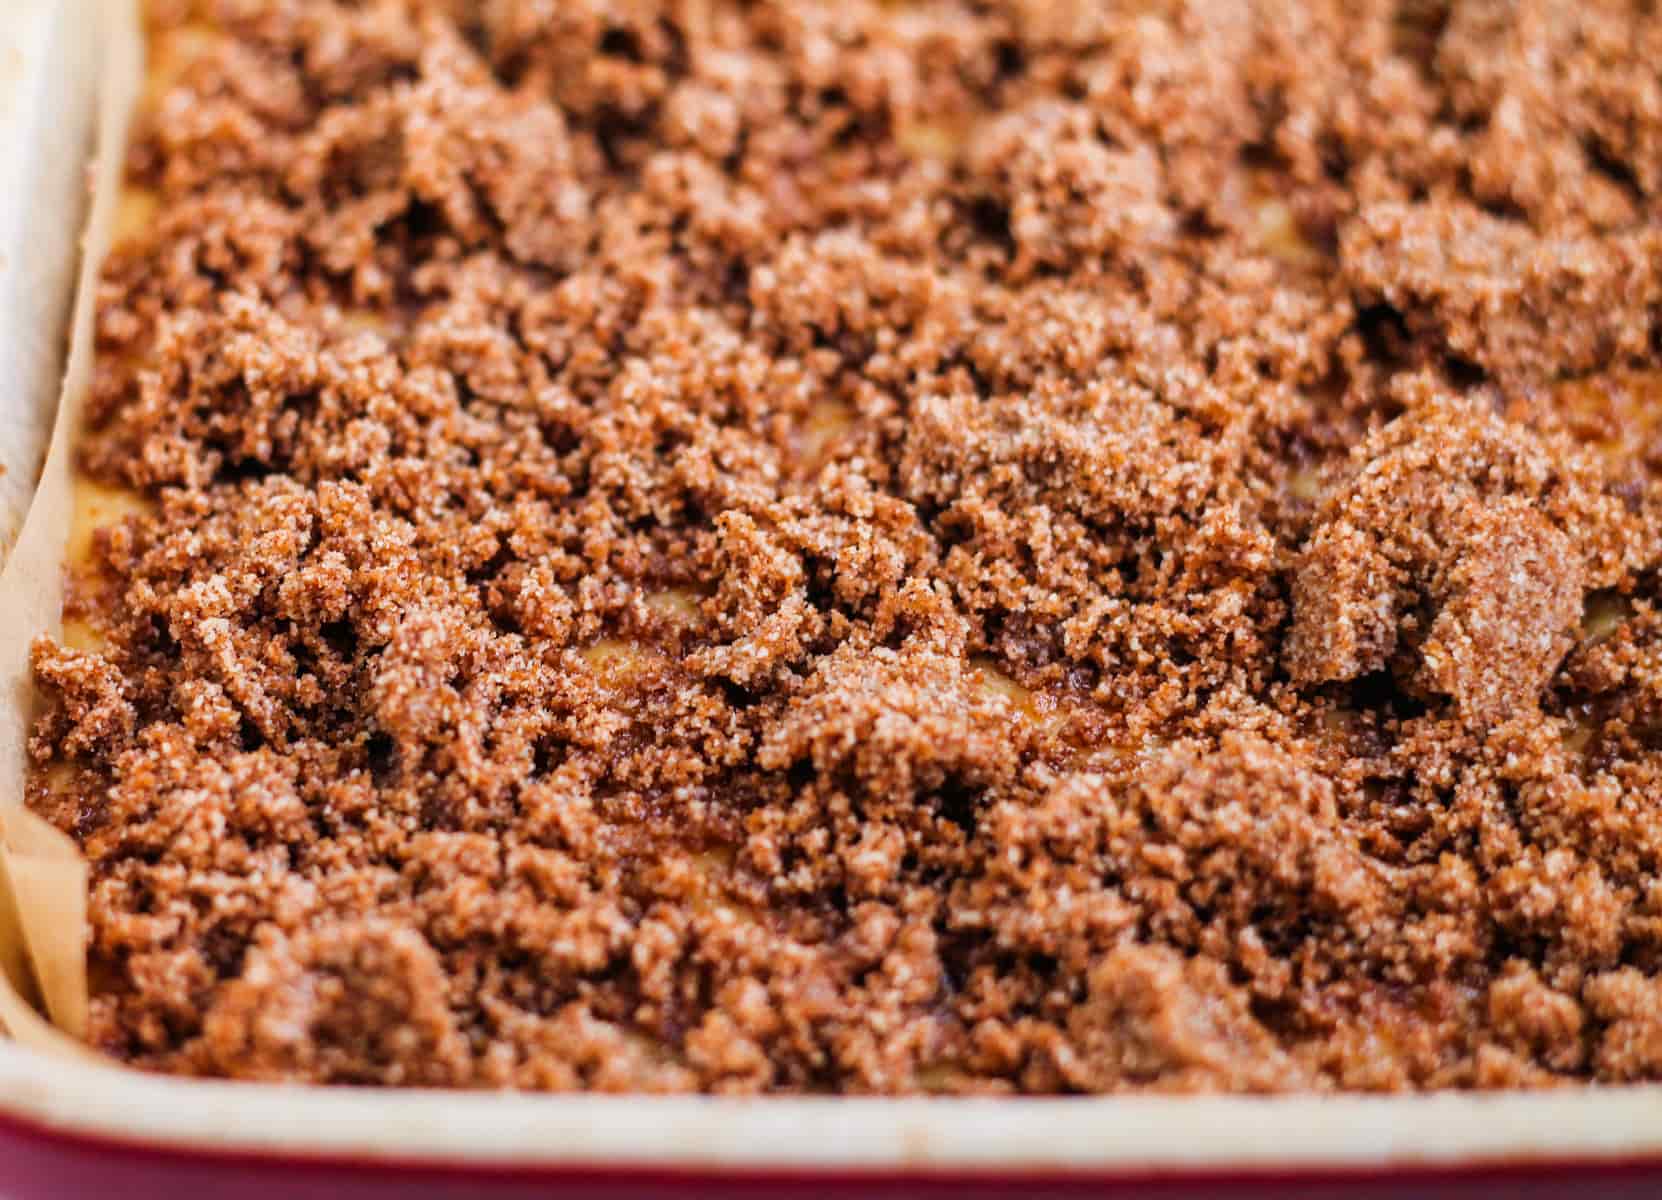 crumble topping on top of cake batter in a baking dish.